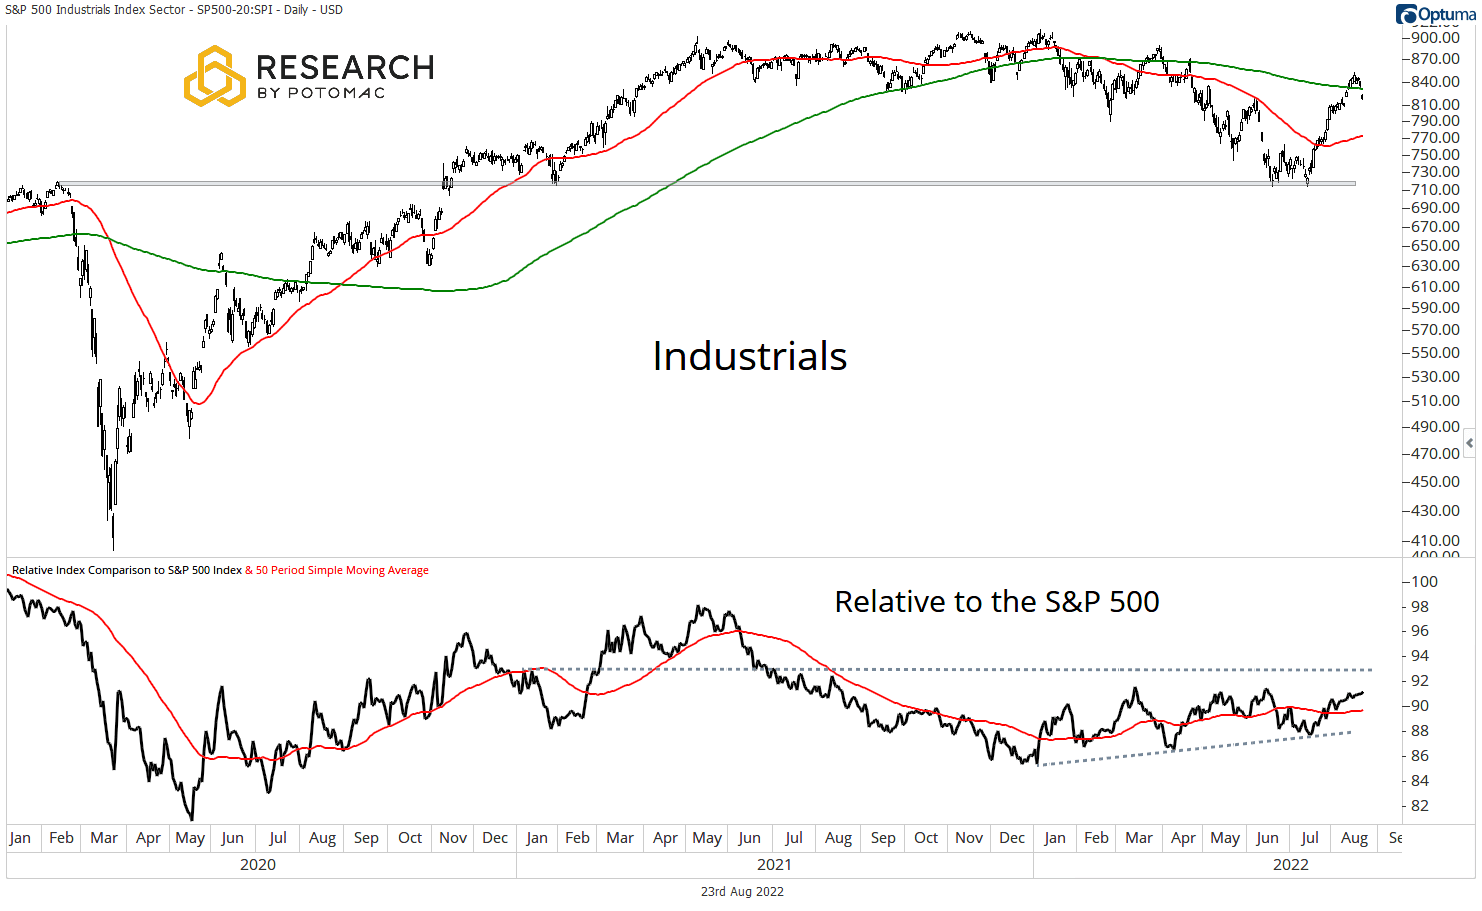 Growth vs Value (Large Cap) chart for March 25th research.